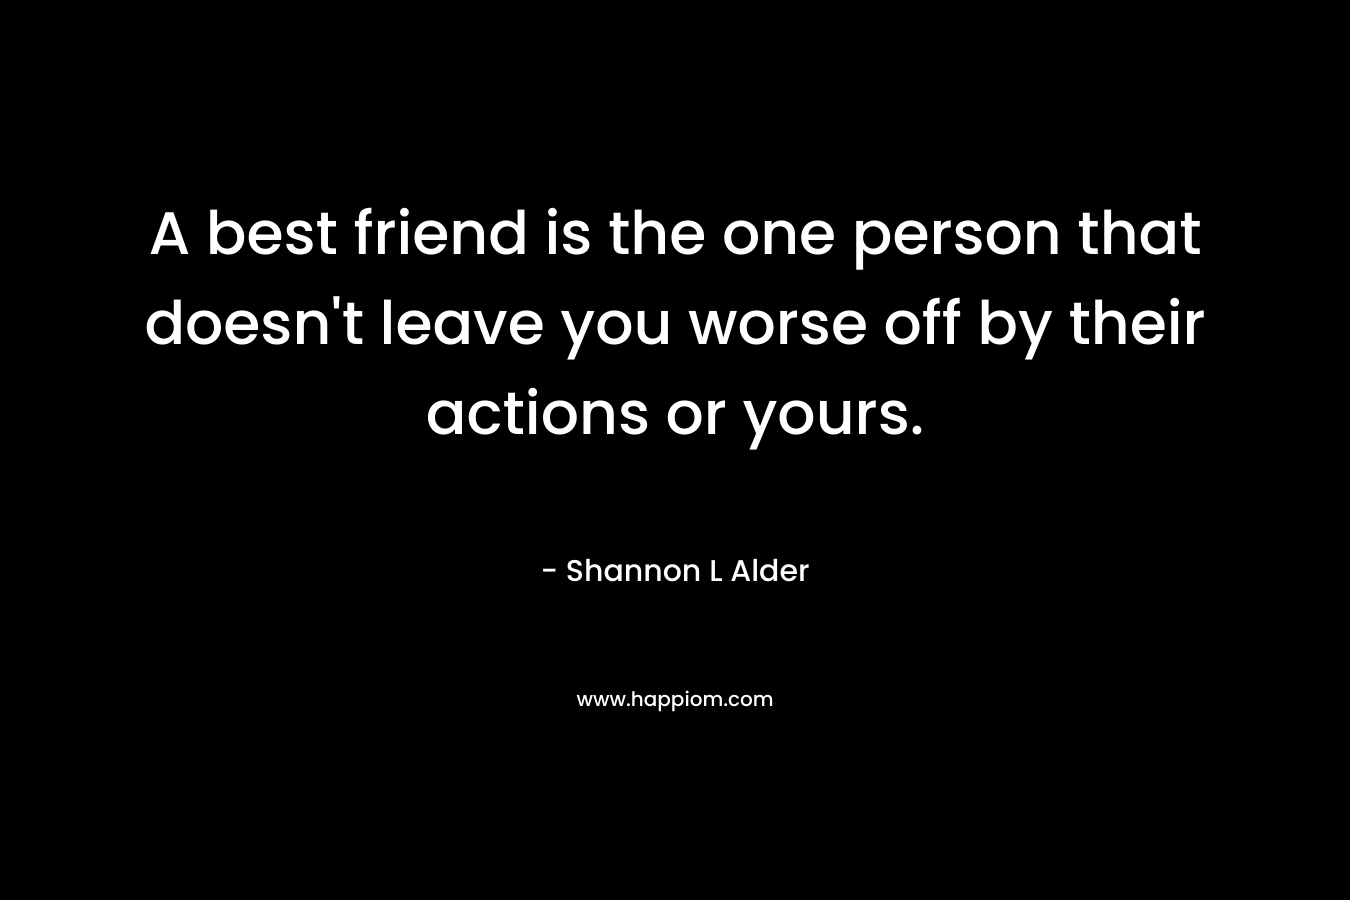 A best friend is the one person that doesn't leave you worse off by their actions or yours.